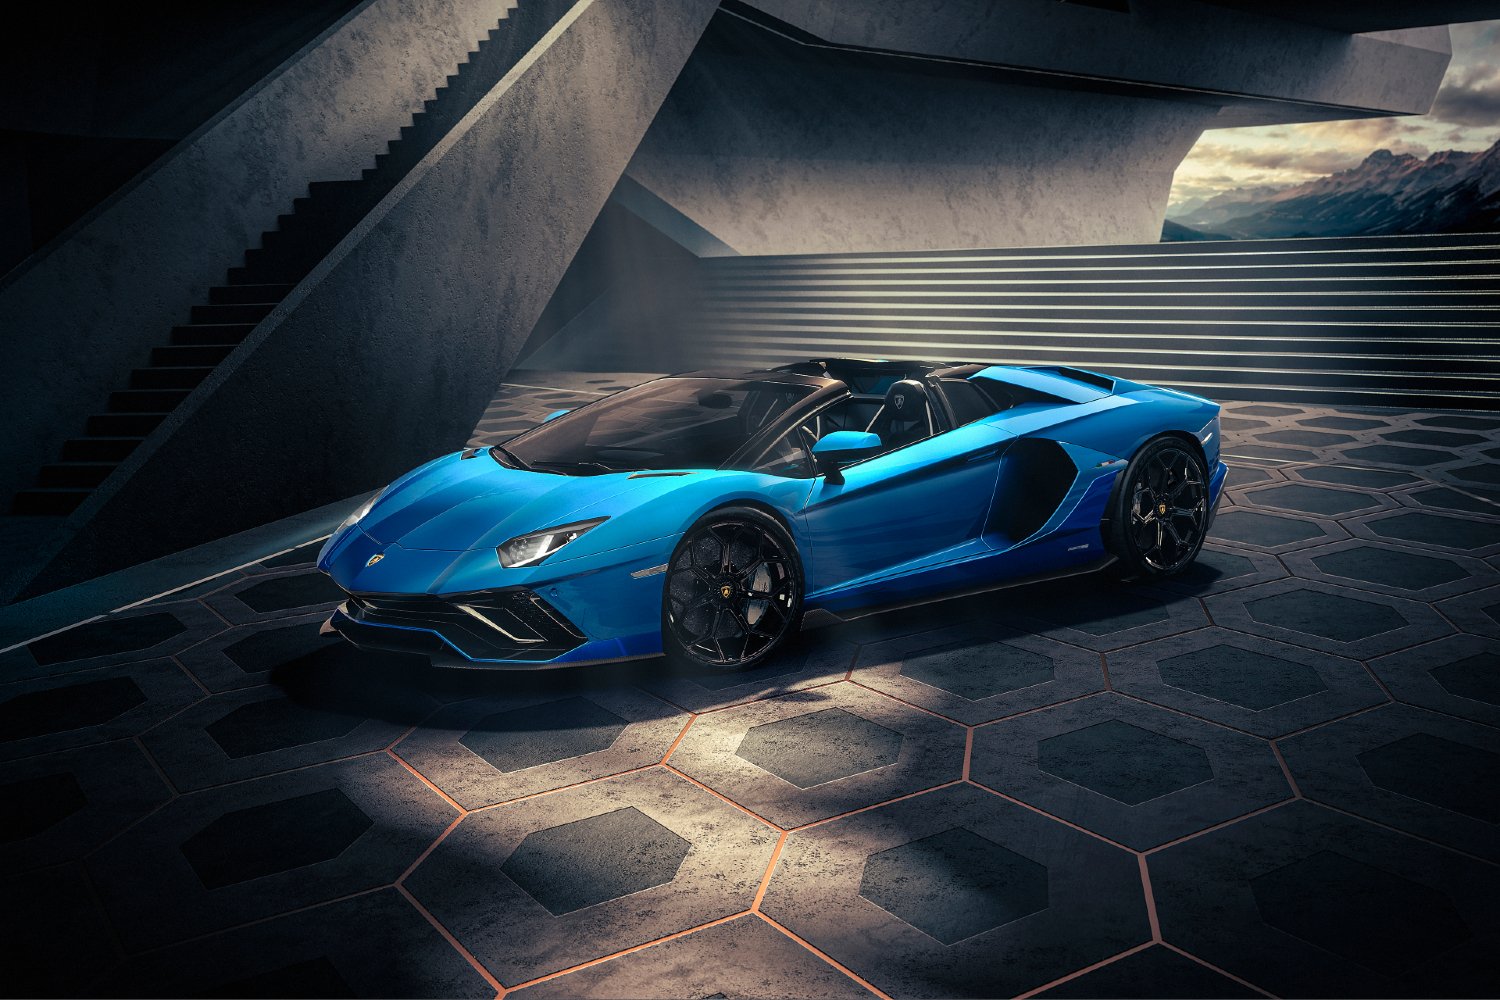 Lamborghini Says Farewell To The Aventador With The LP780 4 Ultimae